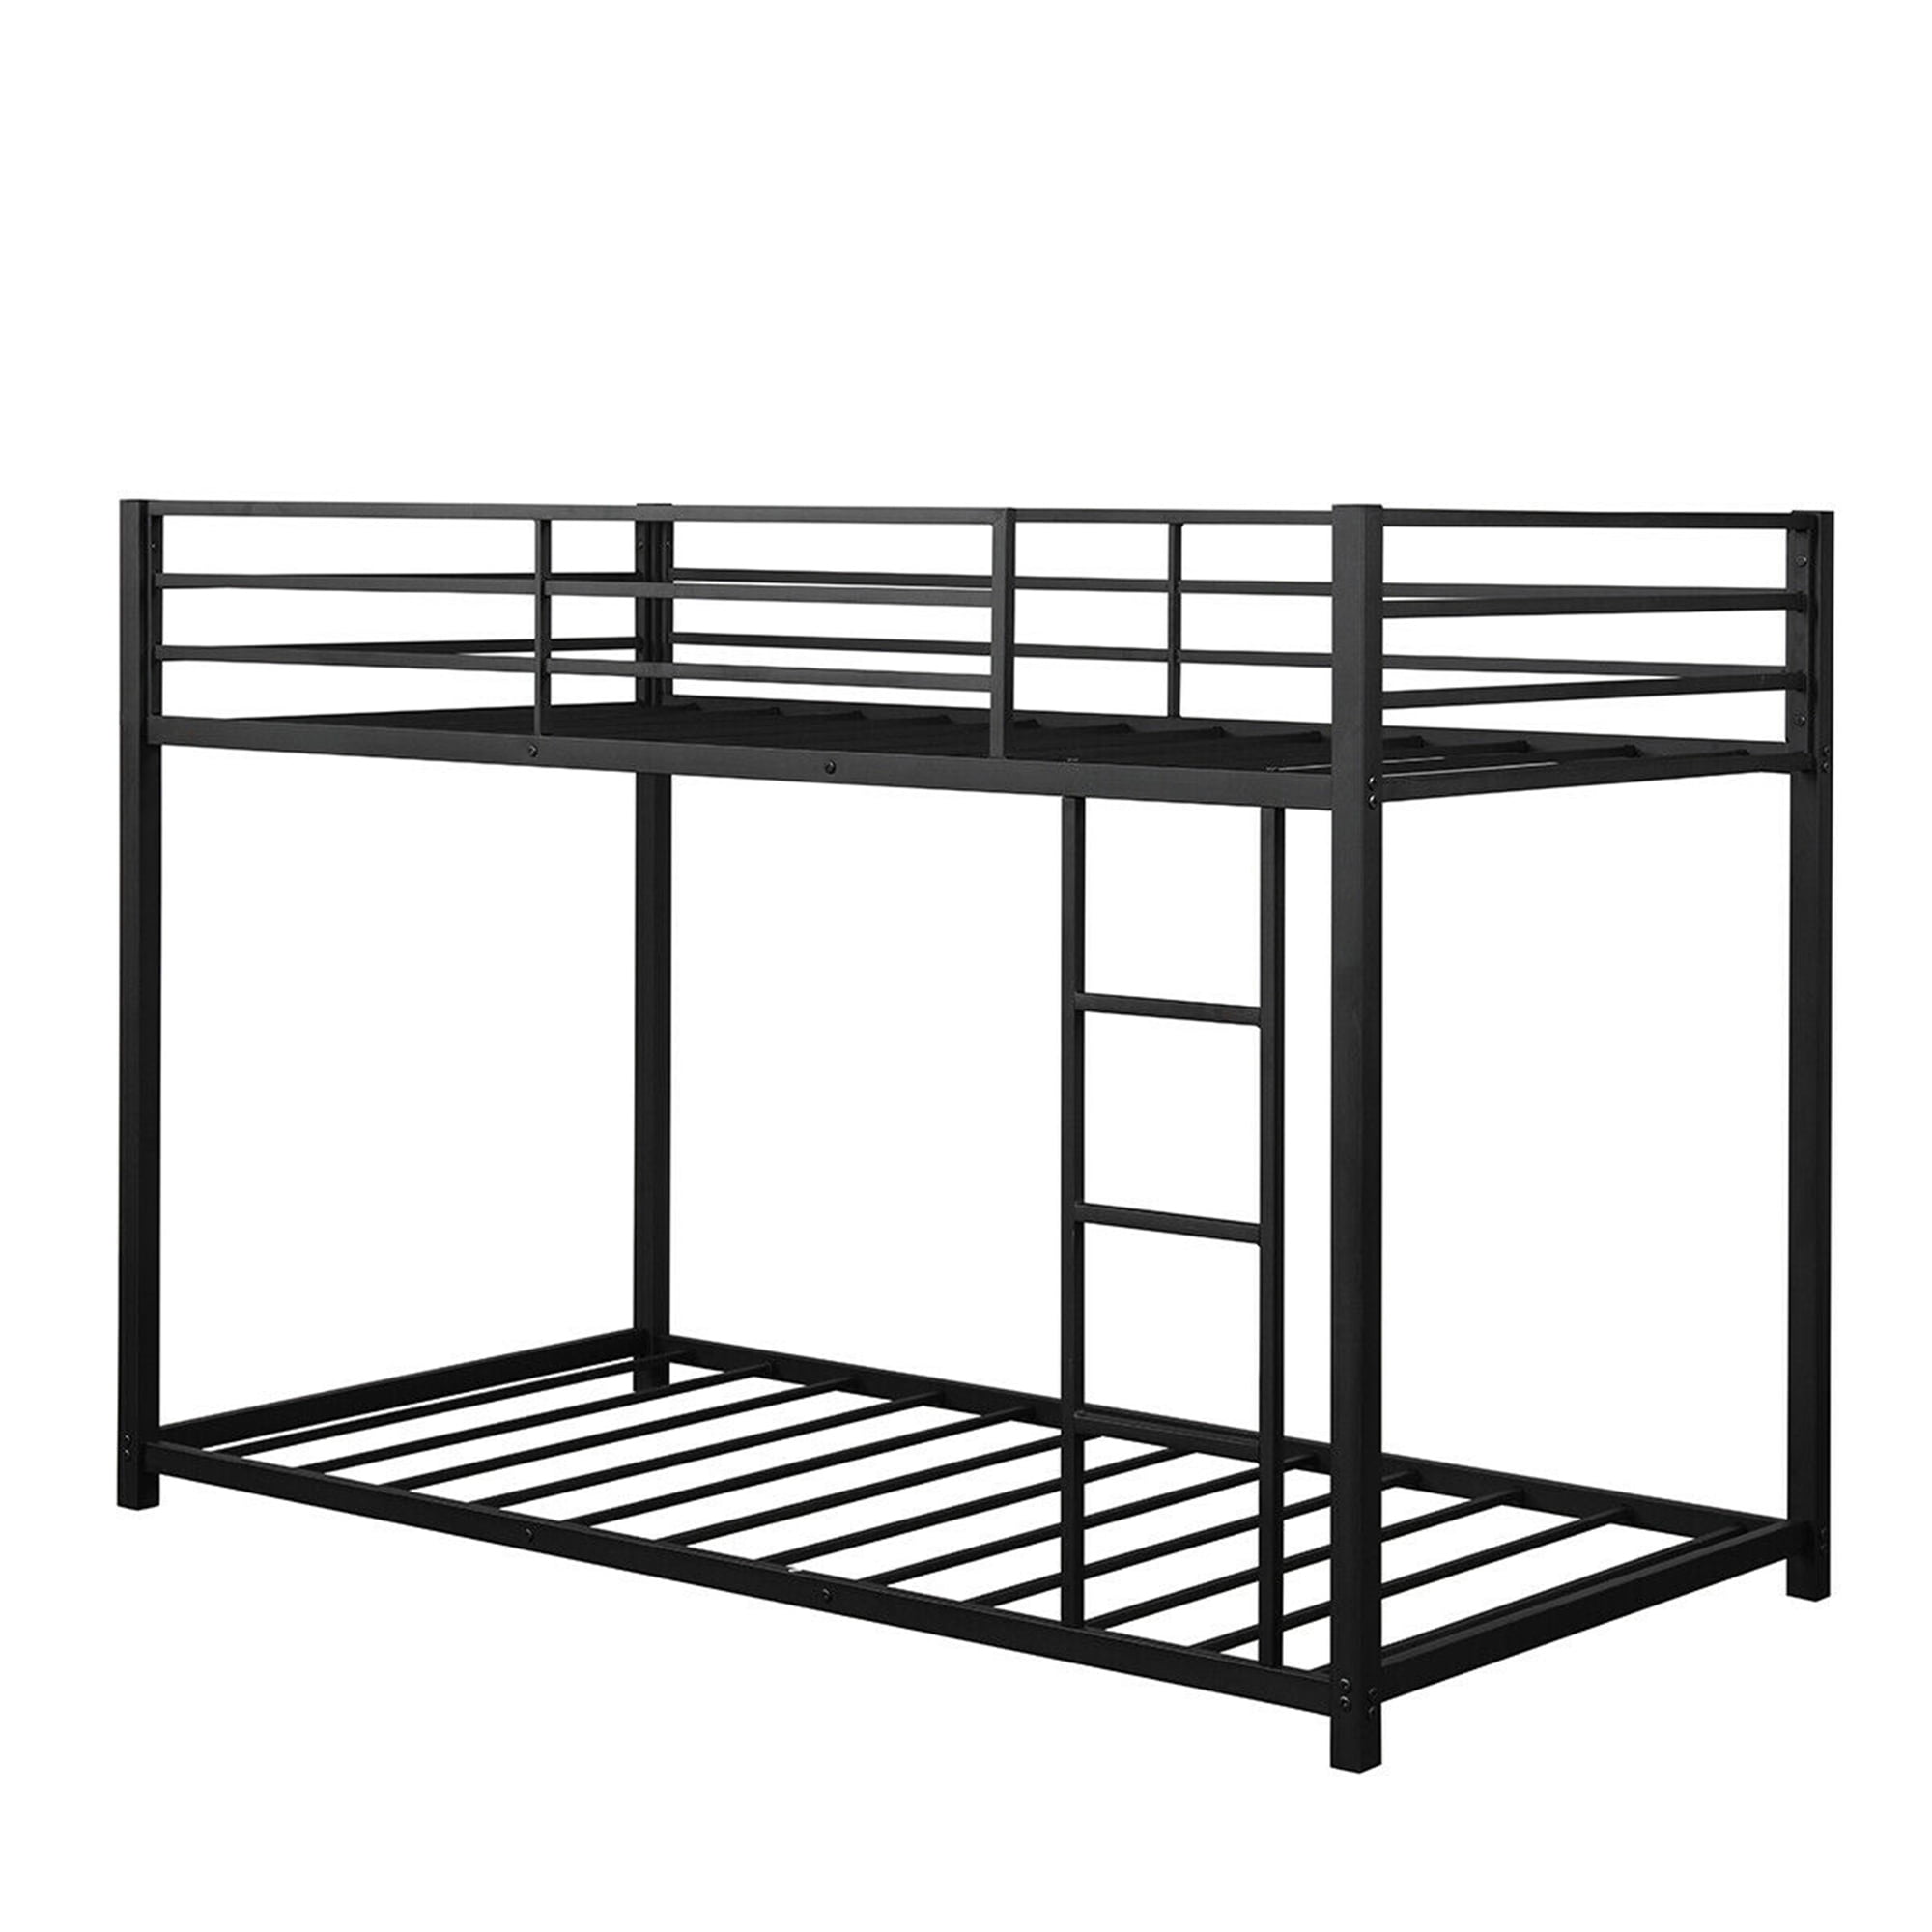 Gymax Twin Over Twin Bunk Bed Metal Platform Bed Frame W/ Guard Rails ...